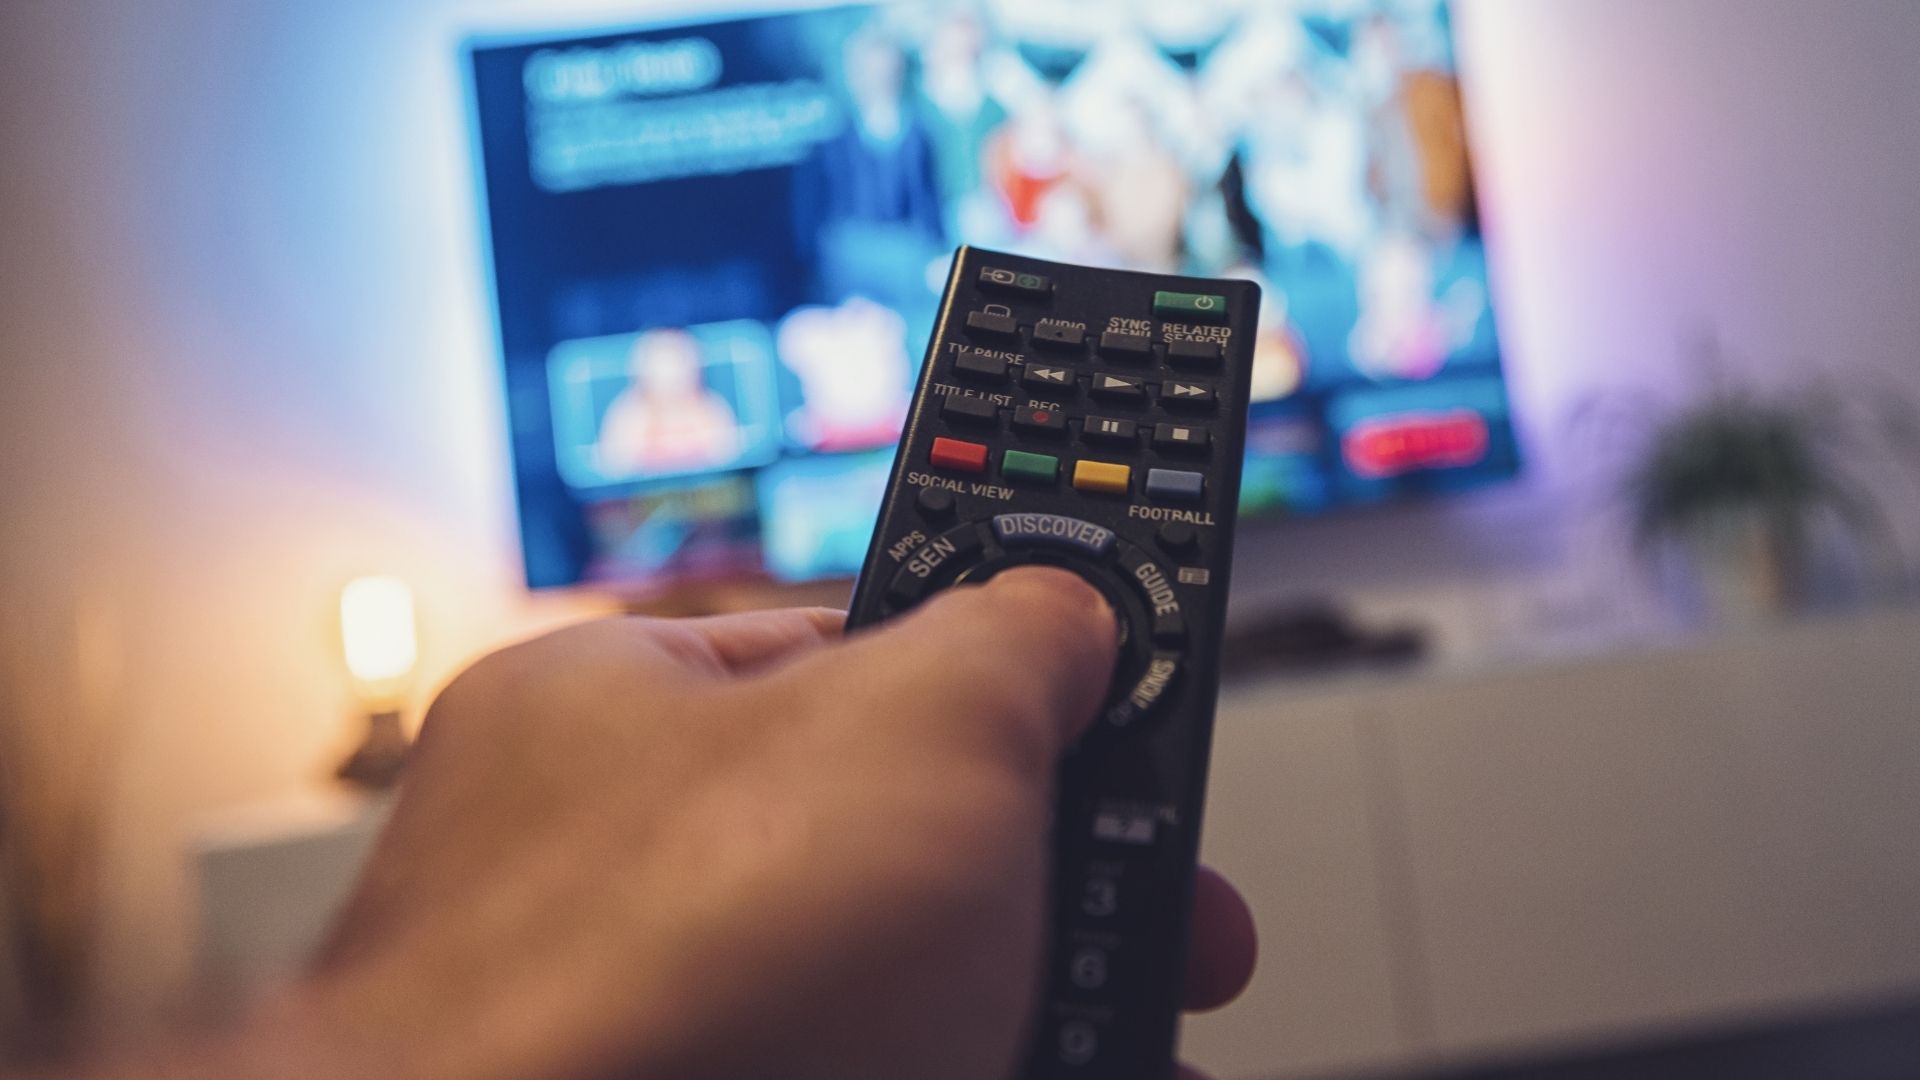 A hand holding a TV remote control and pointing towards a TV